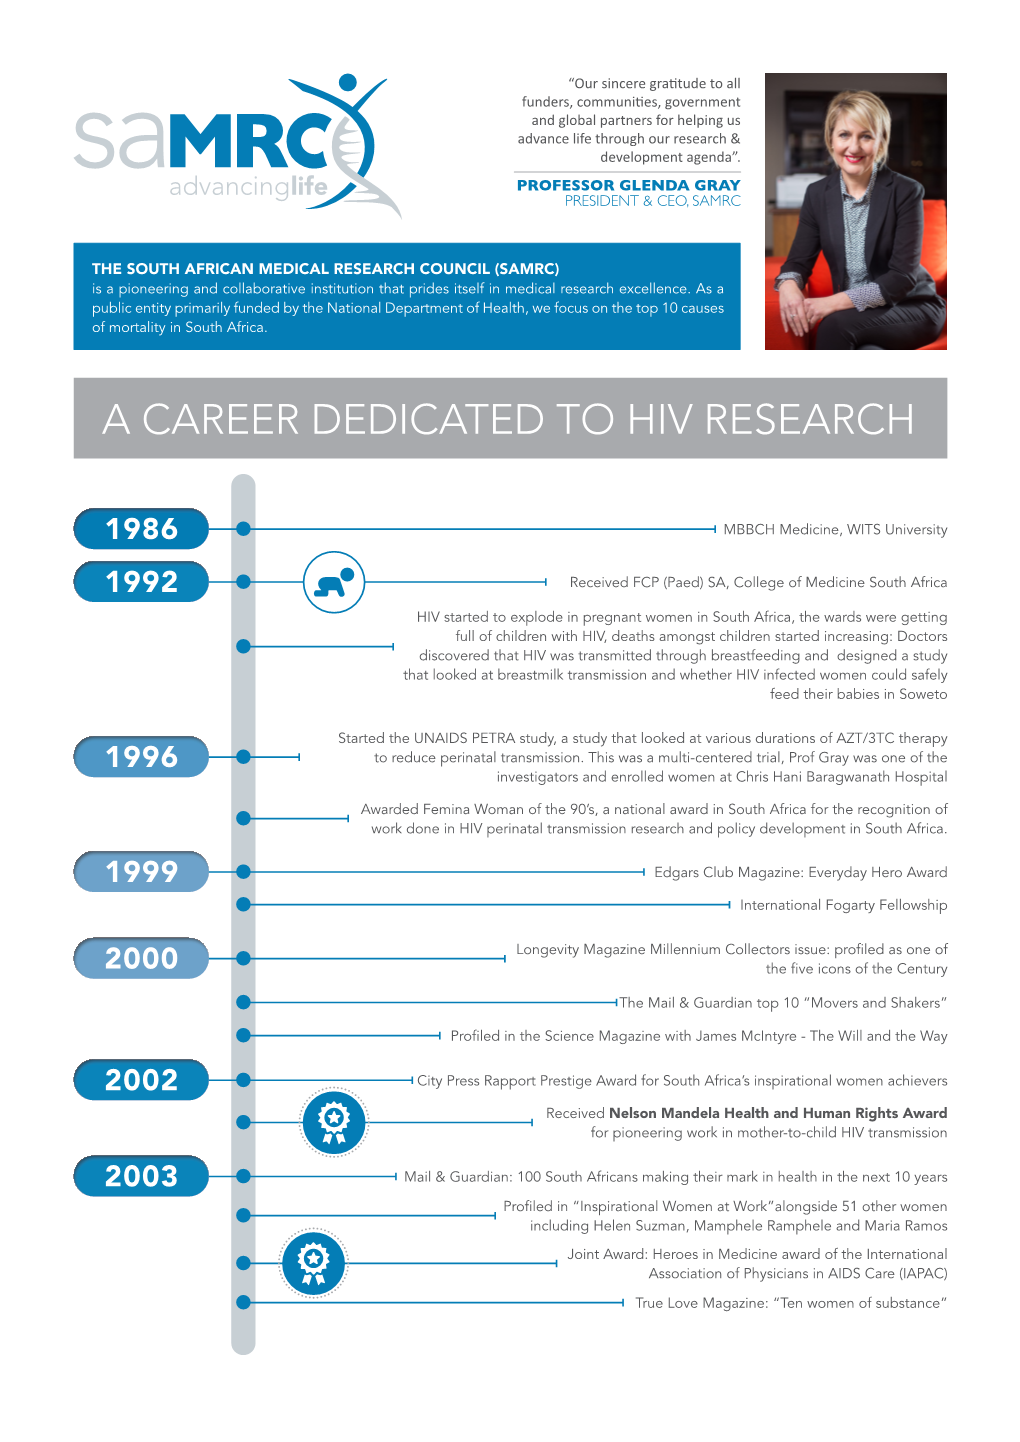 A Career Dedicated to Hiv Research